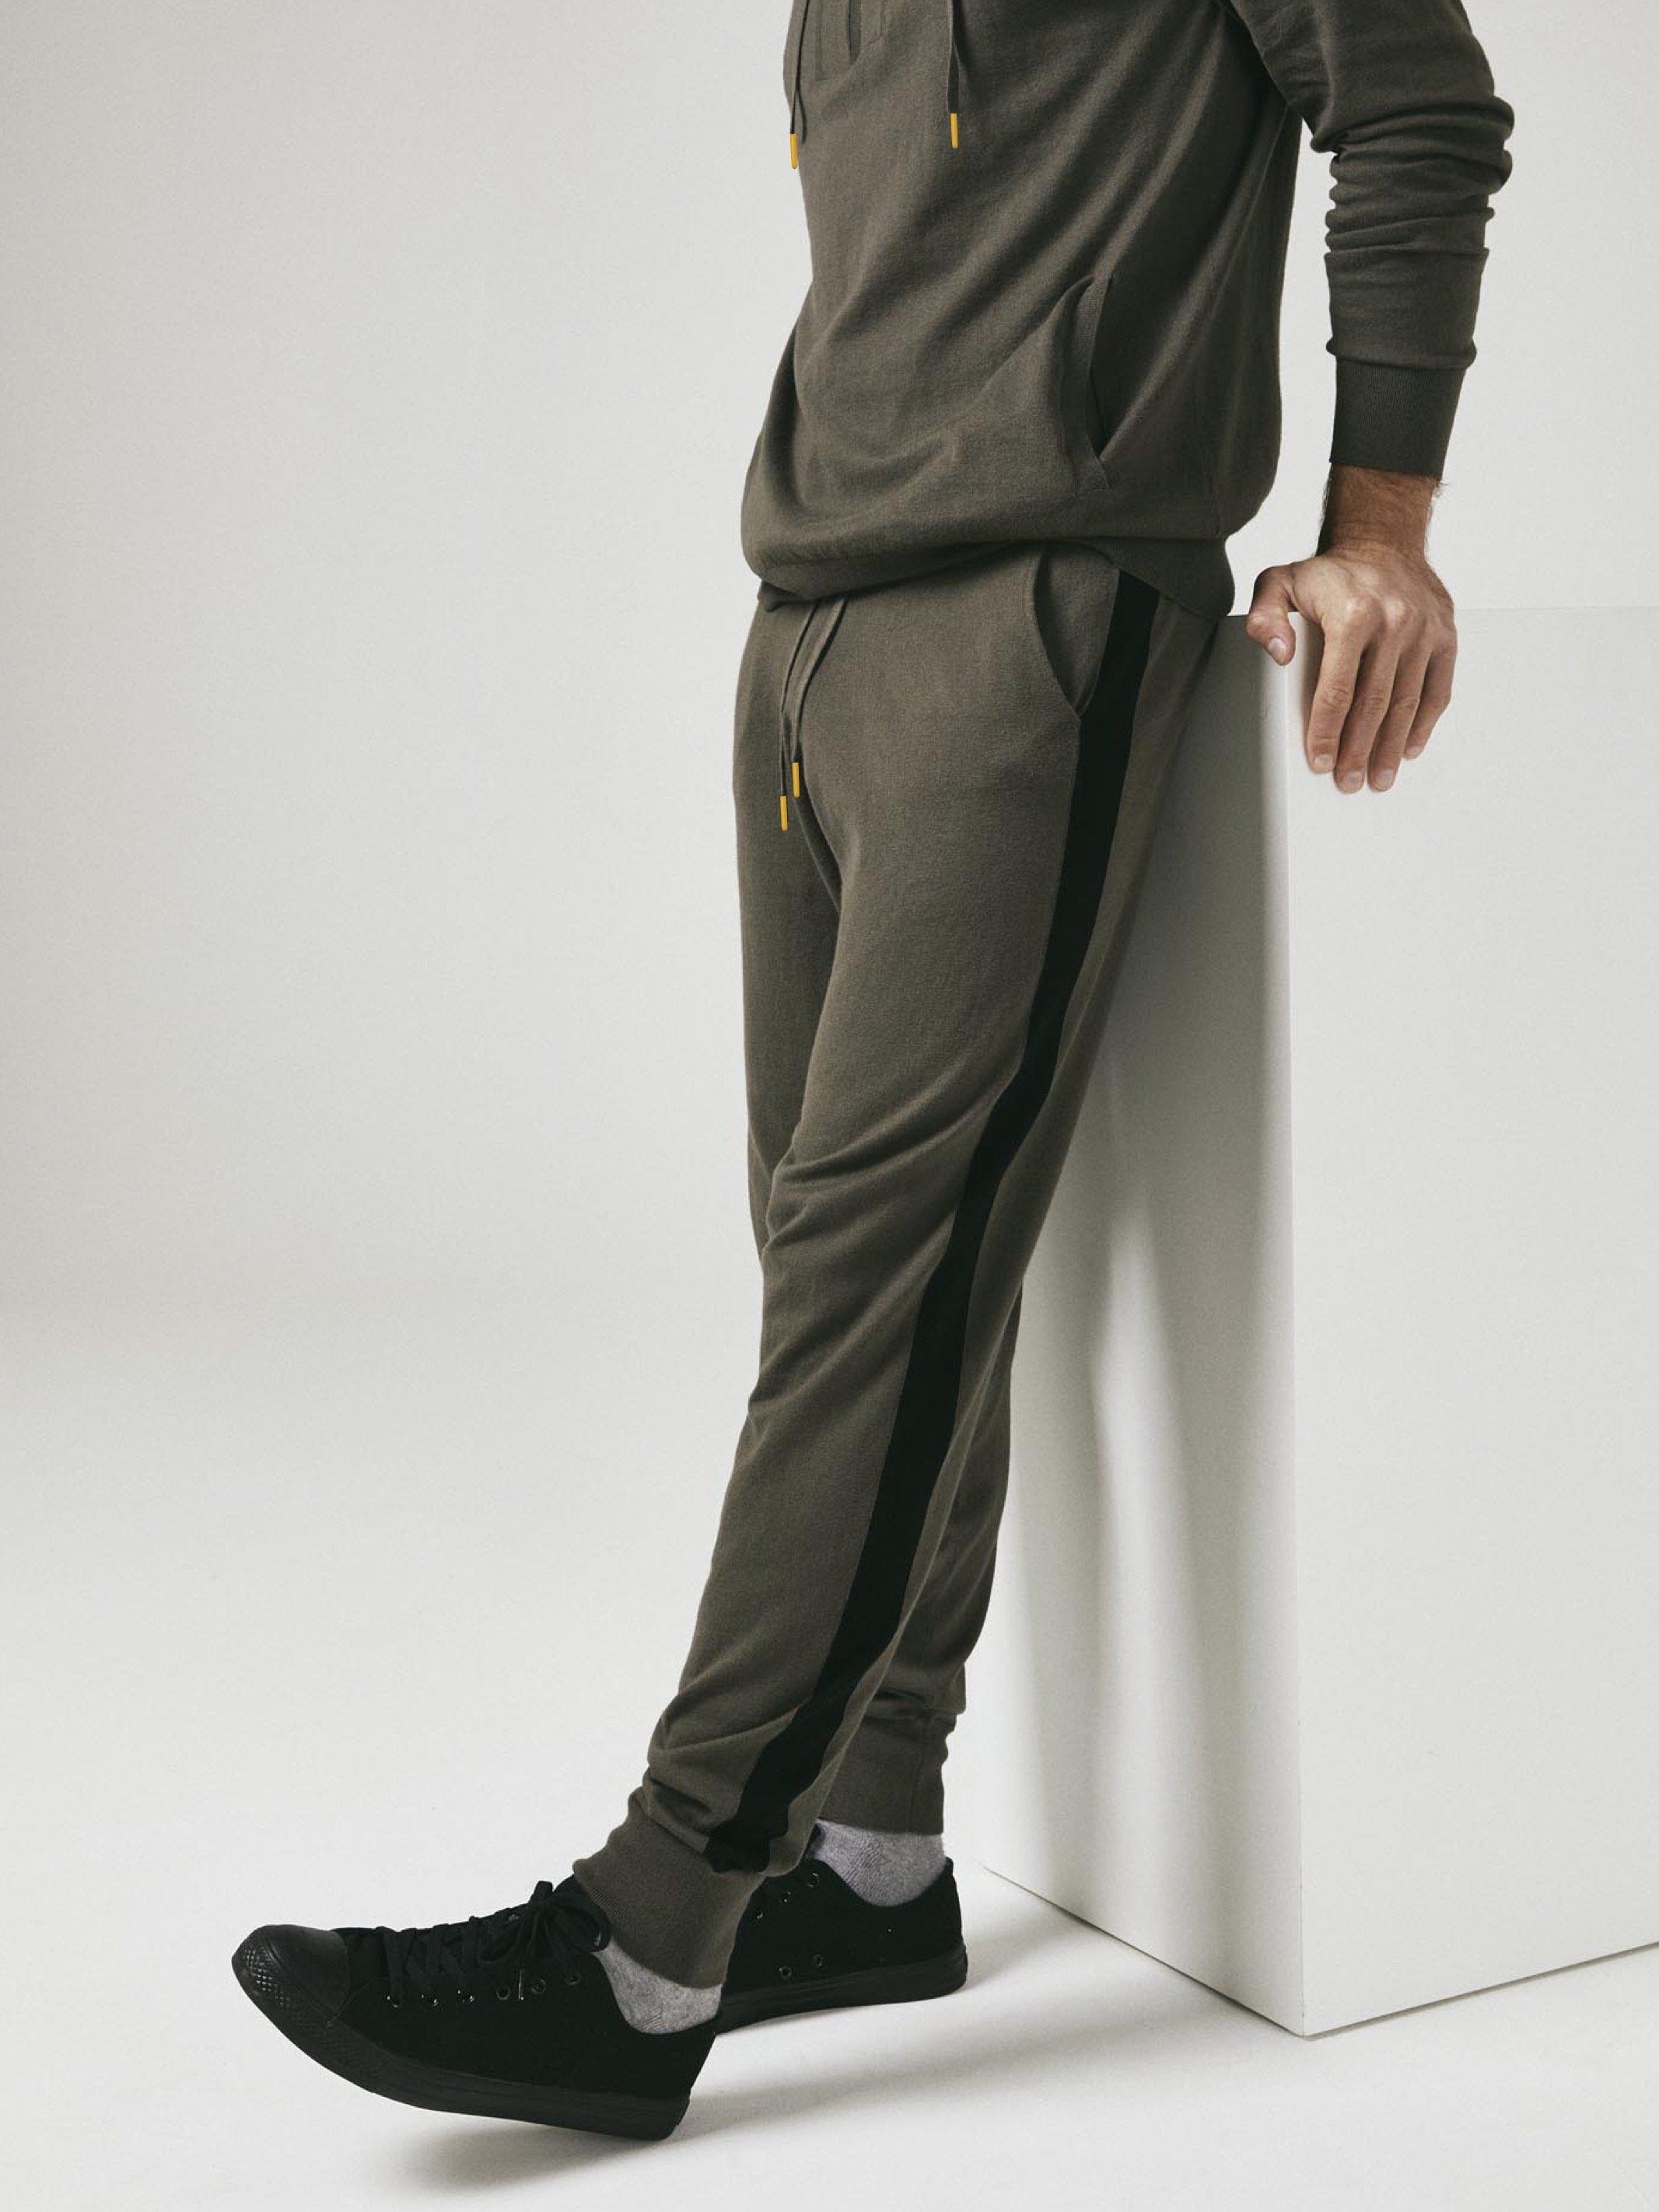 Cashmere & Cotton Knitted Hoody & Track Lounge Set - Olive / Black Strip